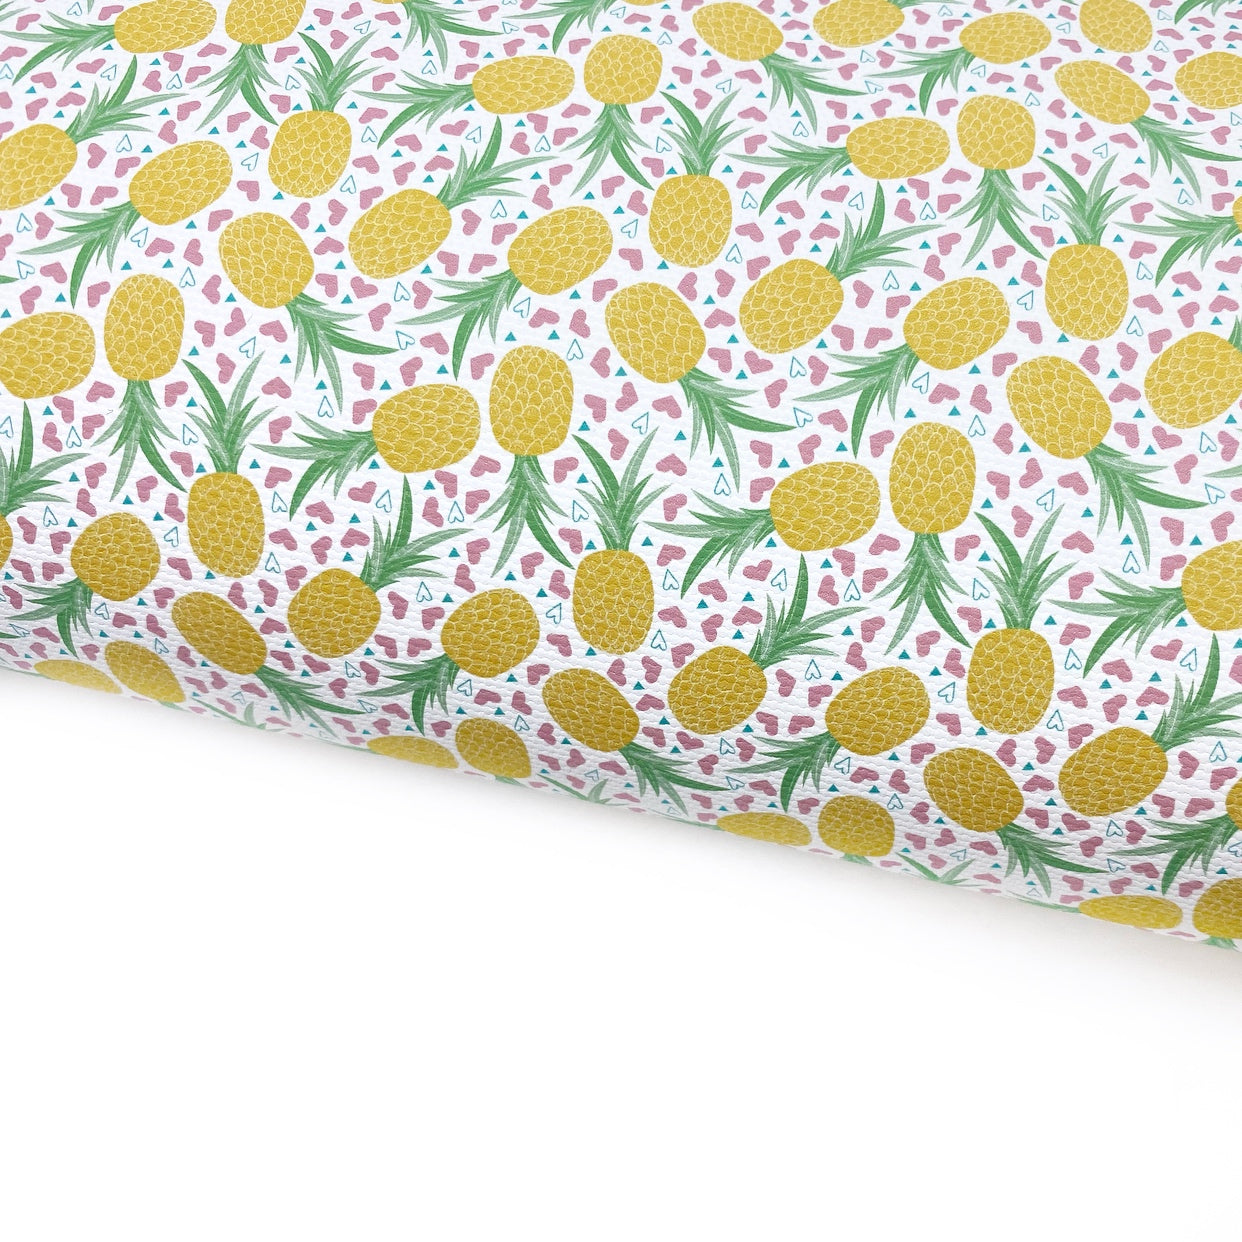 Pineapple Hearts Lux Premium Printed Bow Fabric